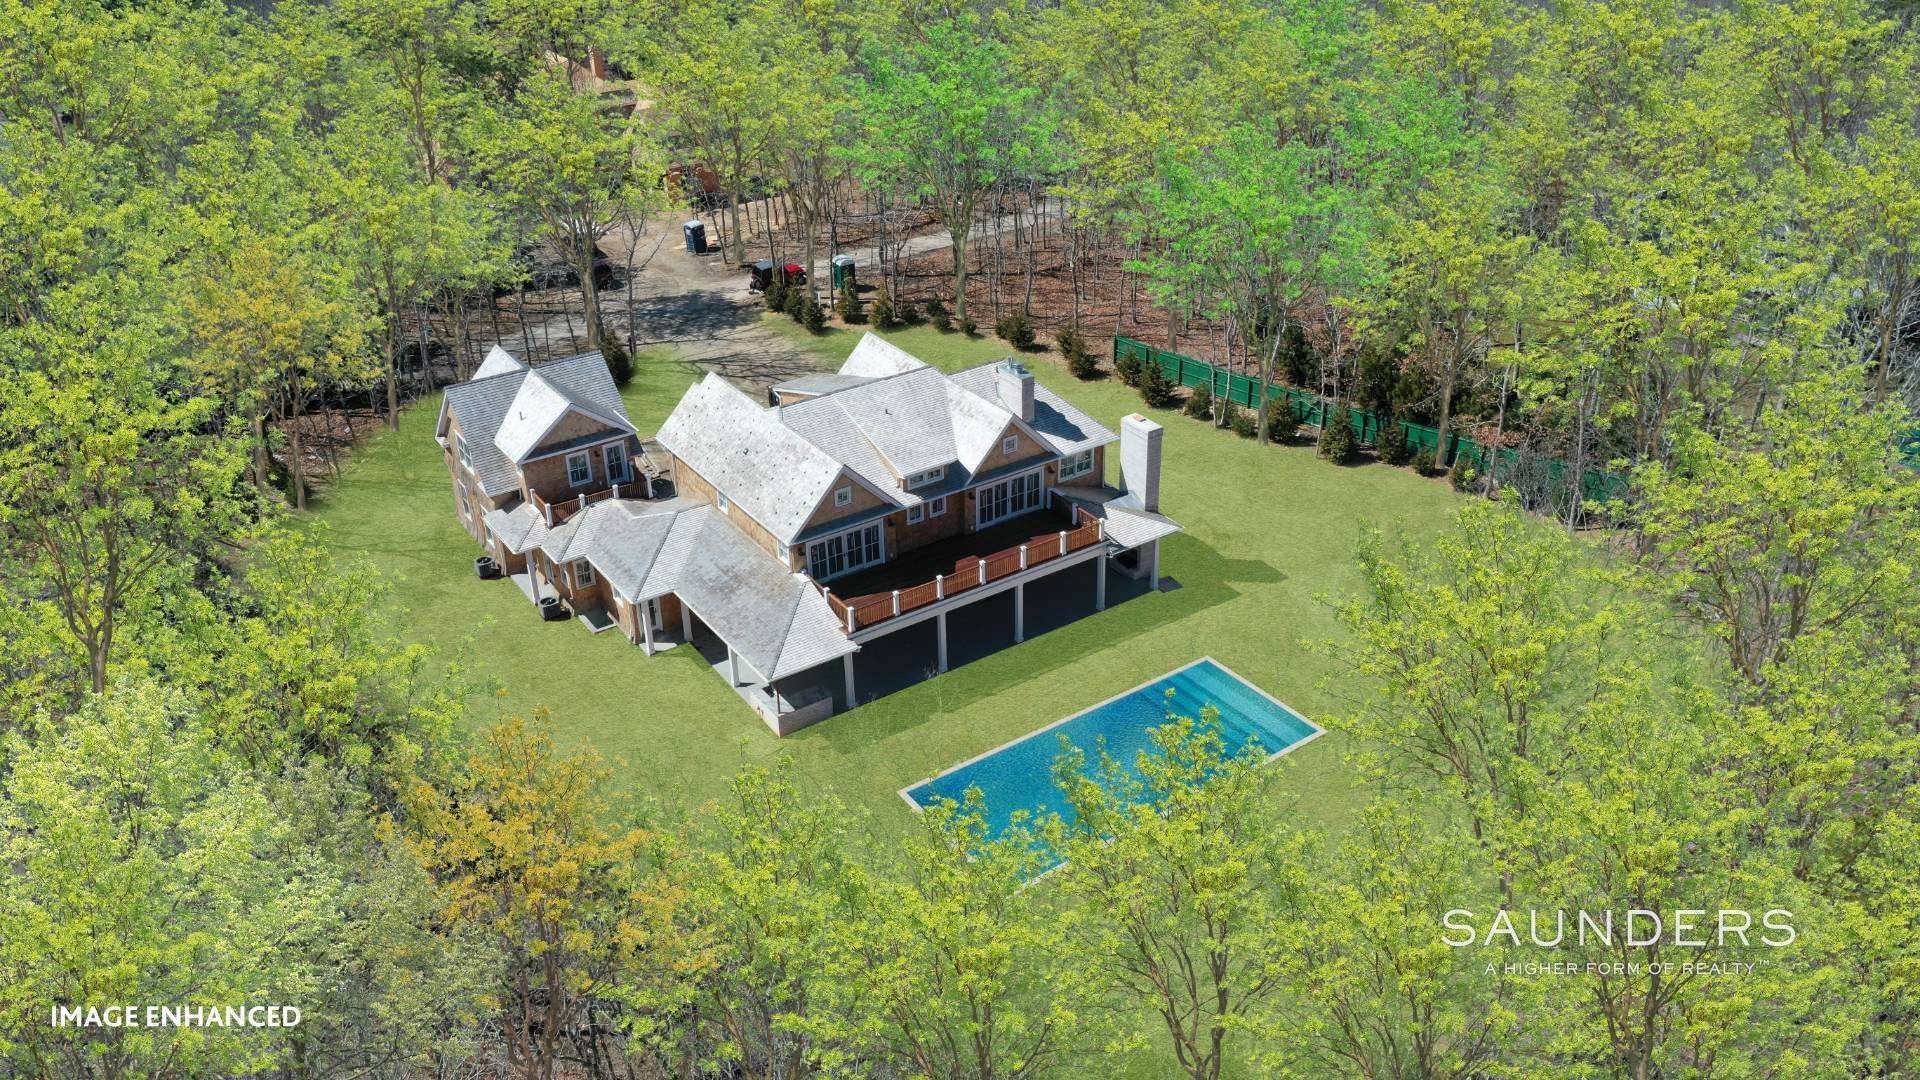 Single Family Homes for Sale at Grand New Construction On 1.8 Acres In East Hampton 11 Dering Lane, East Hampton, NY 11937